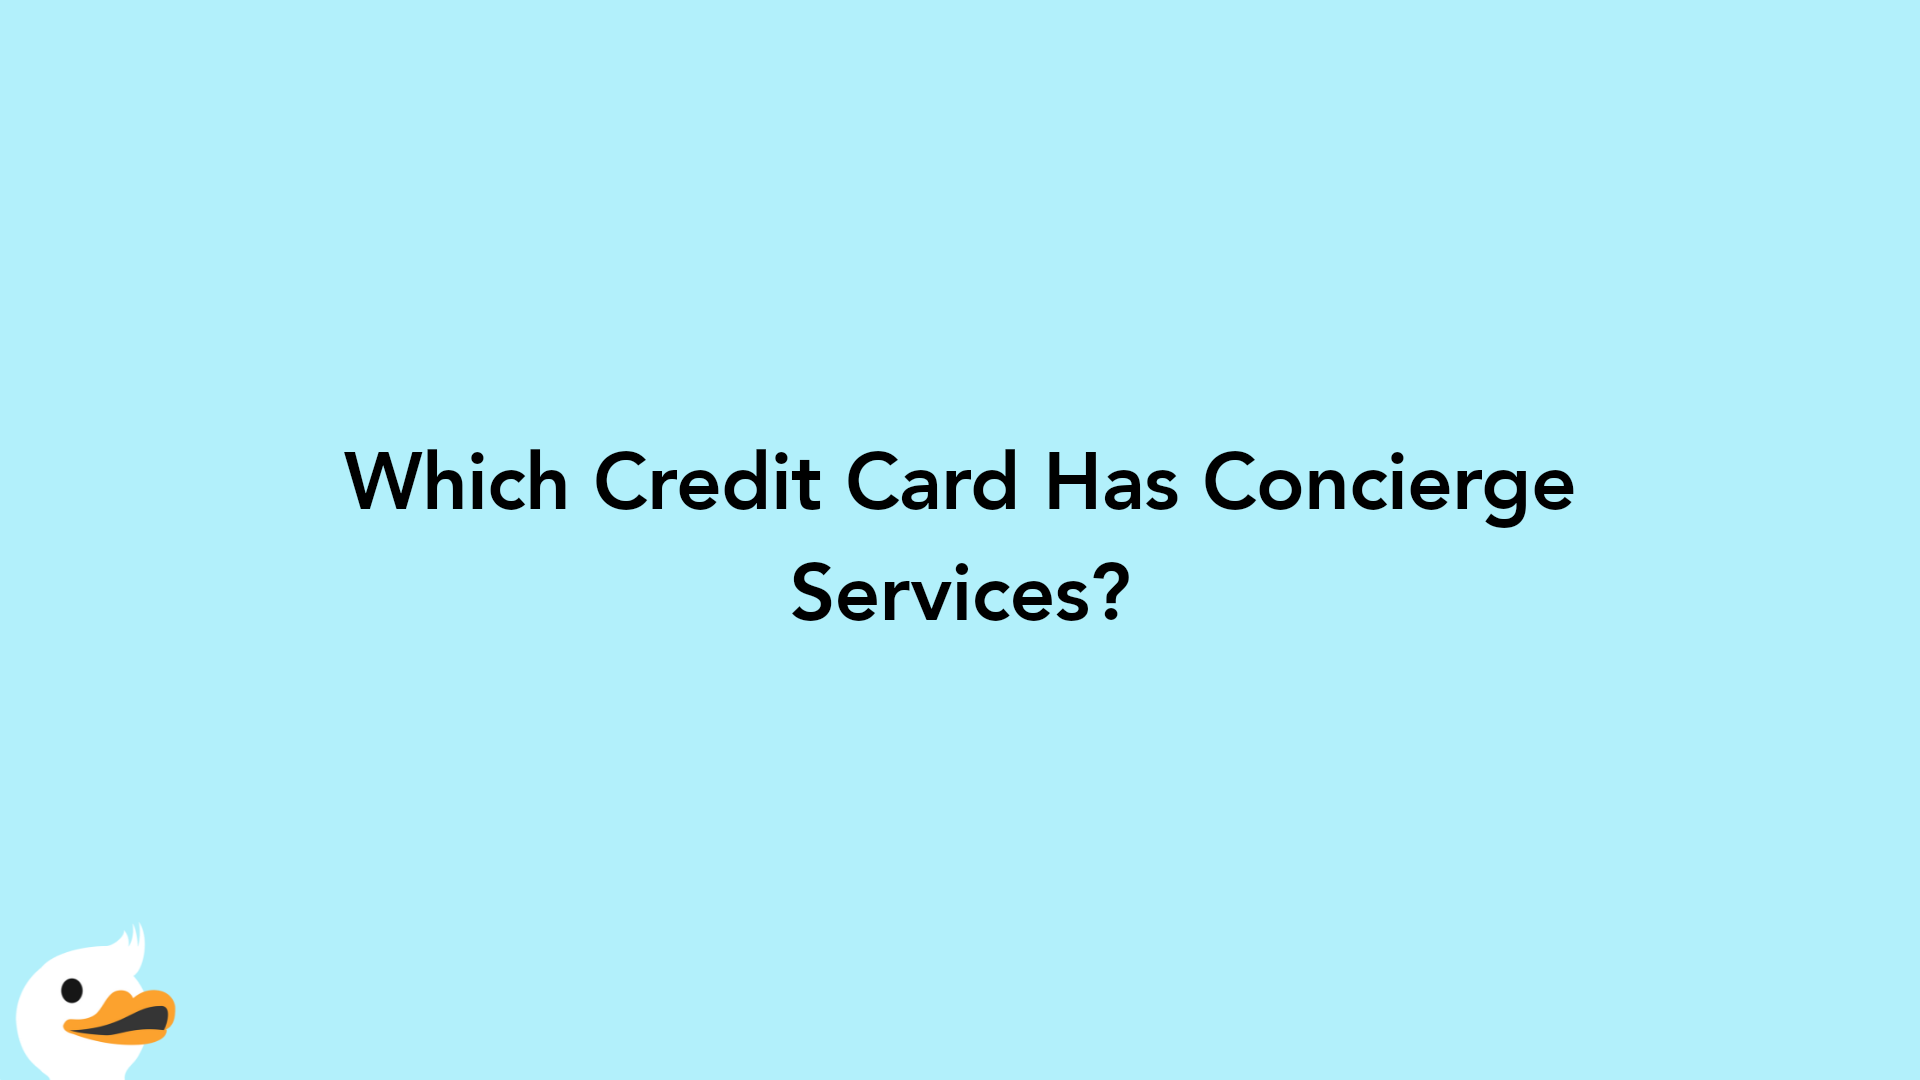 Which Credit Card Has Concierge Services?